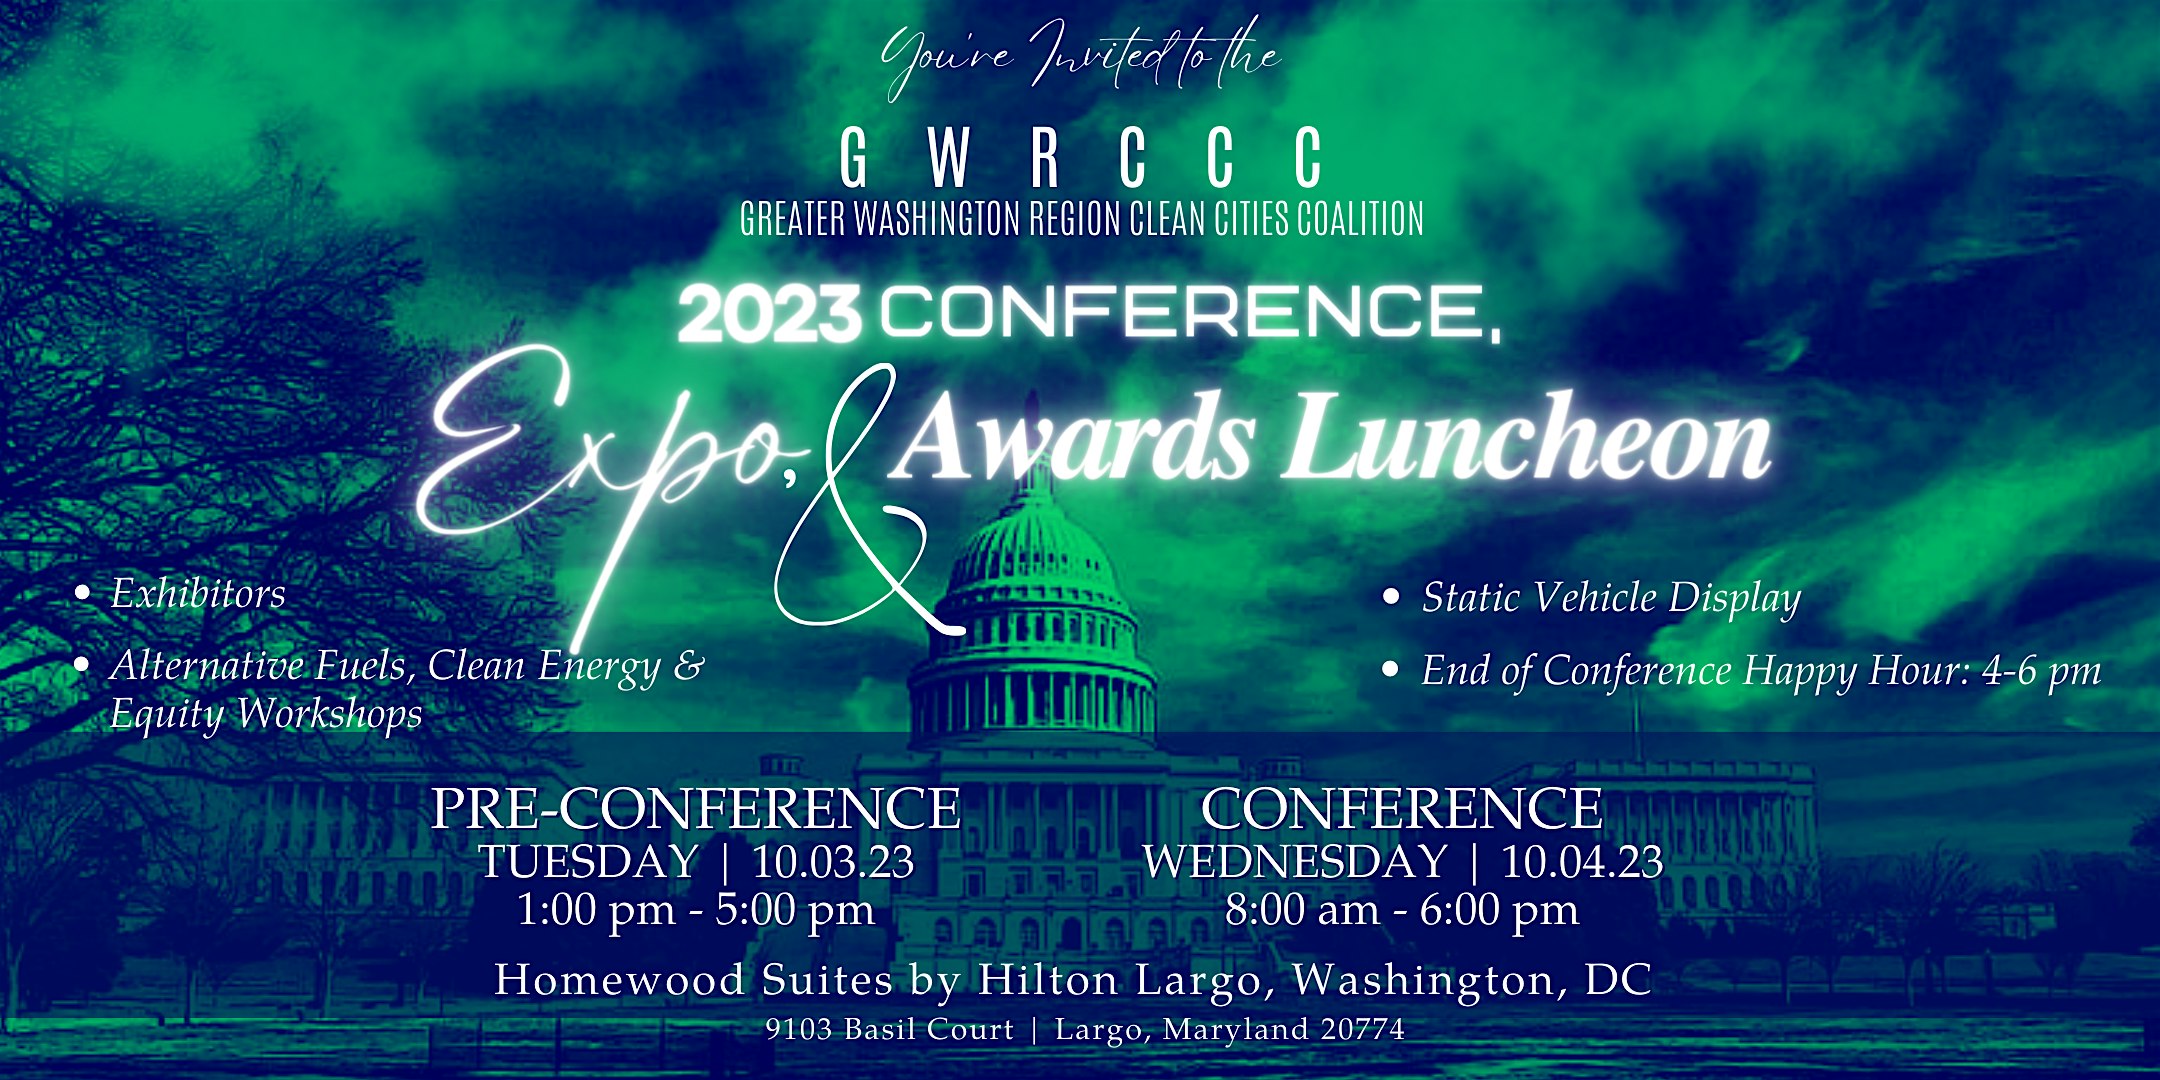 GWRCCC’s  Annual Conference